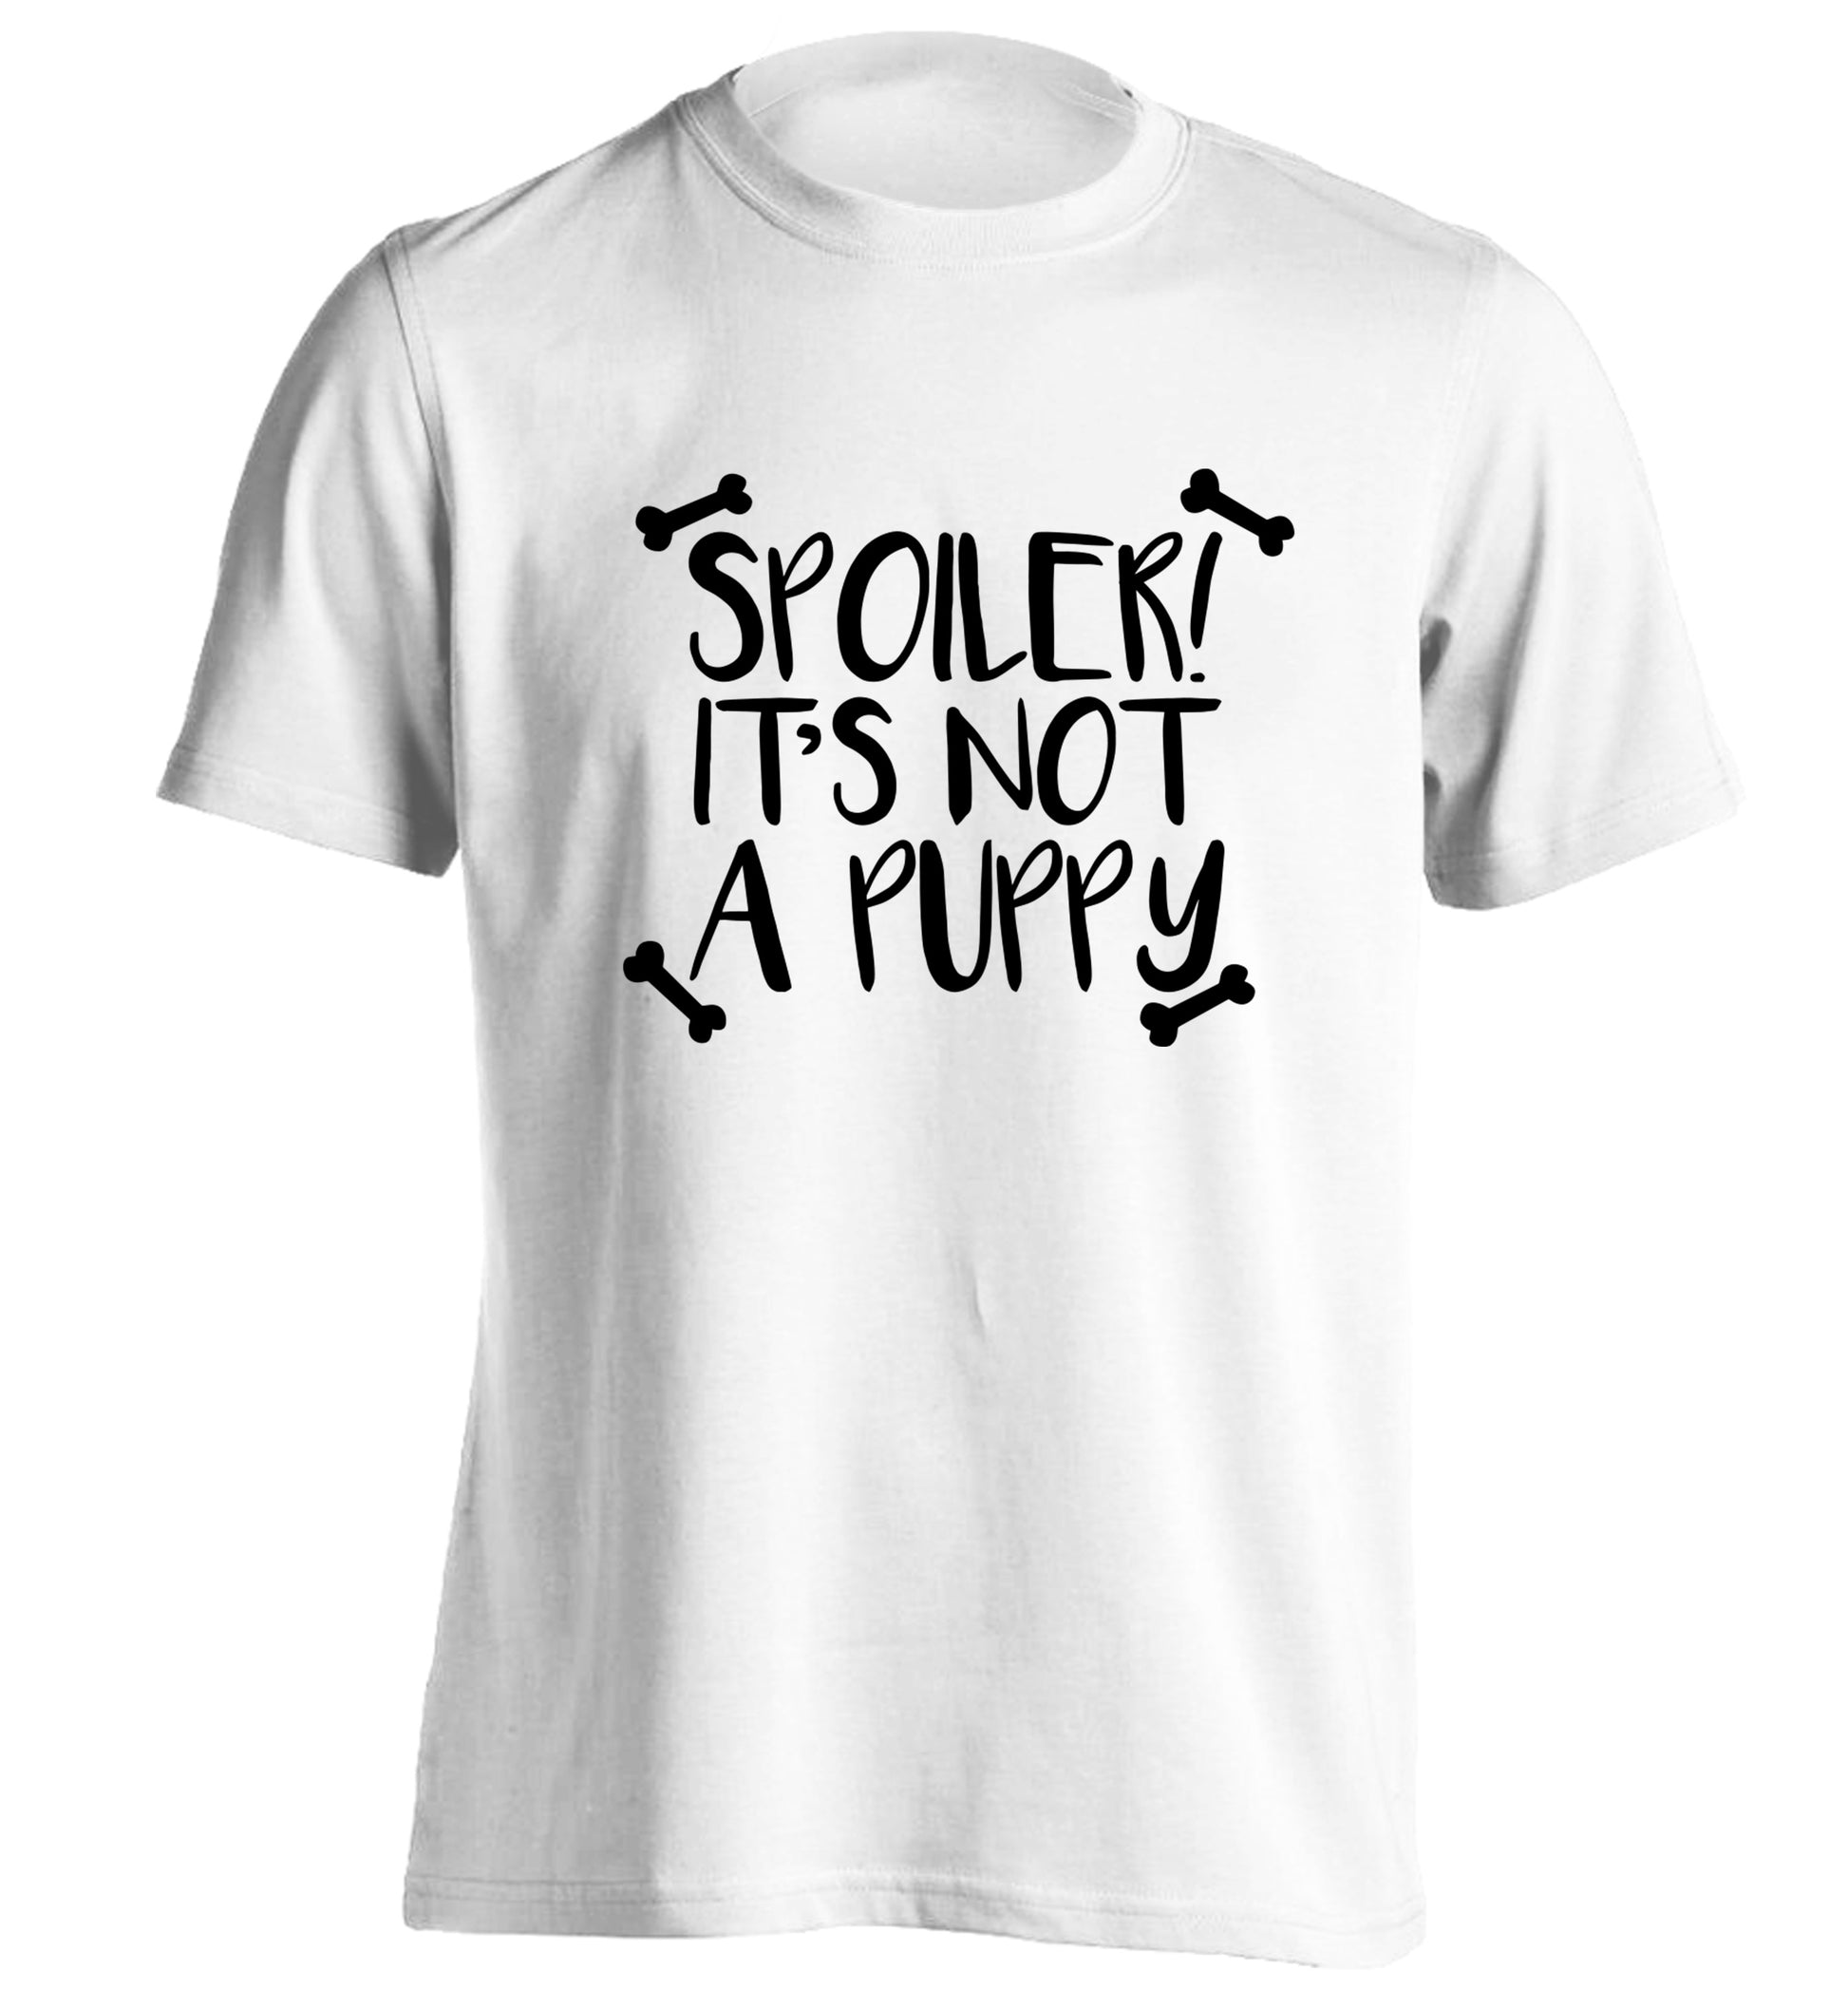 Spoiler it's not a puppy adults unisex white Tshirt 2XL